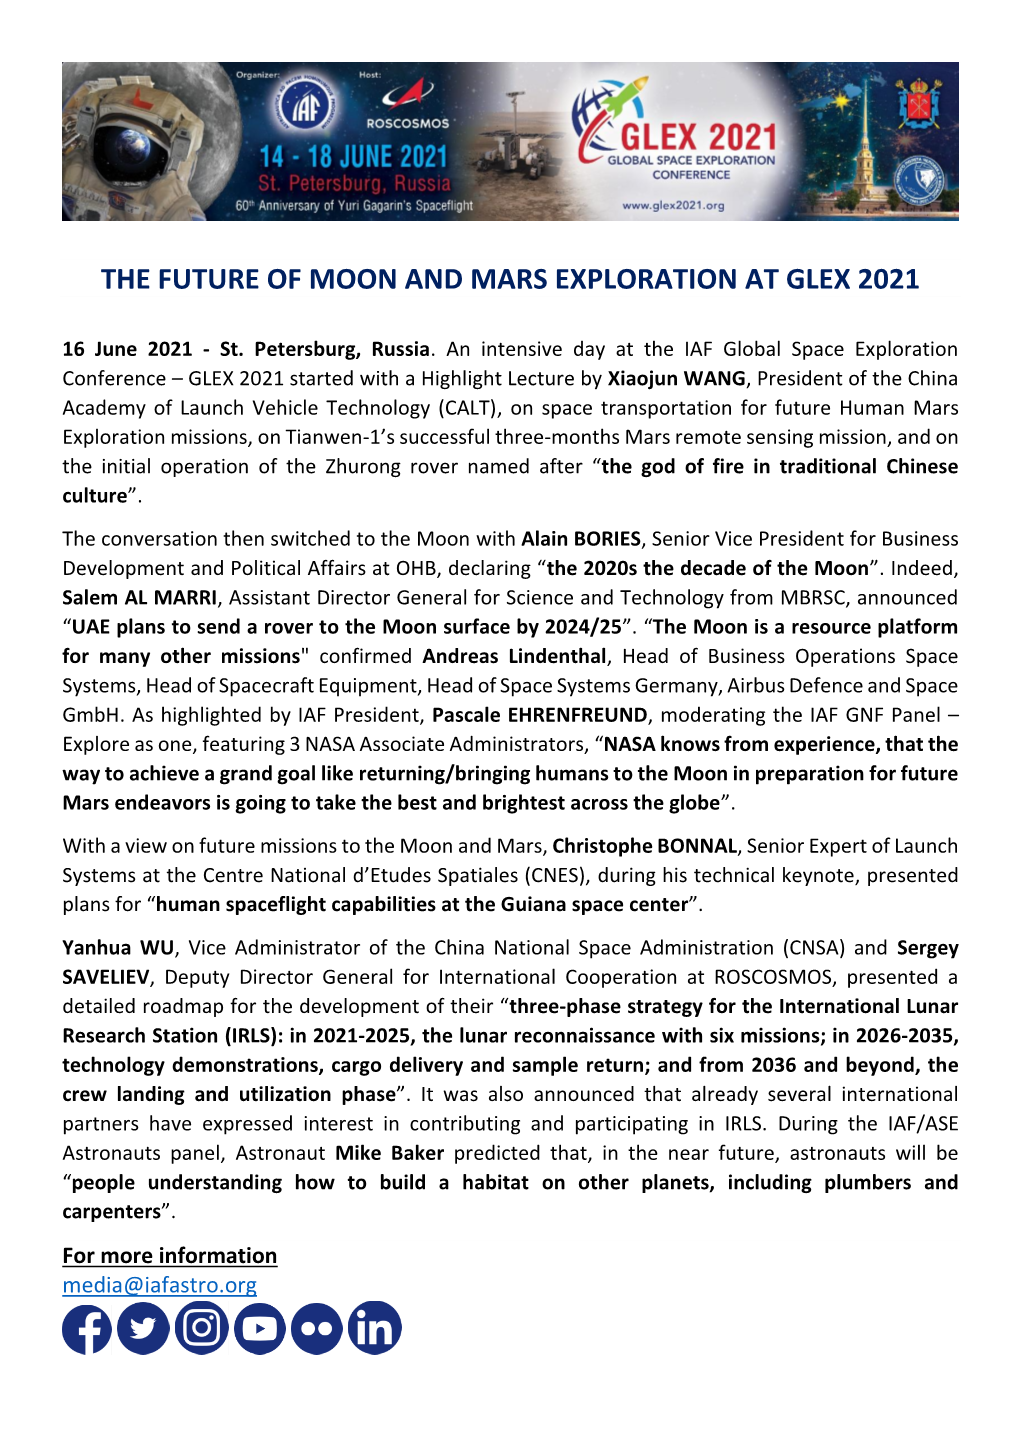 The Future of Moon and Mars Exploration at Glex 2021